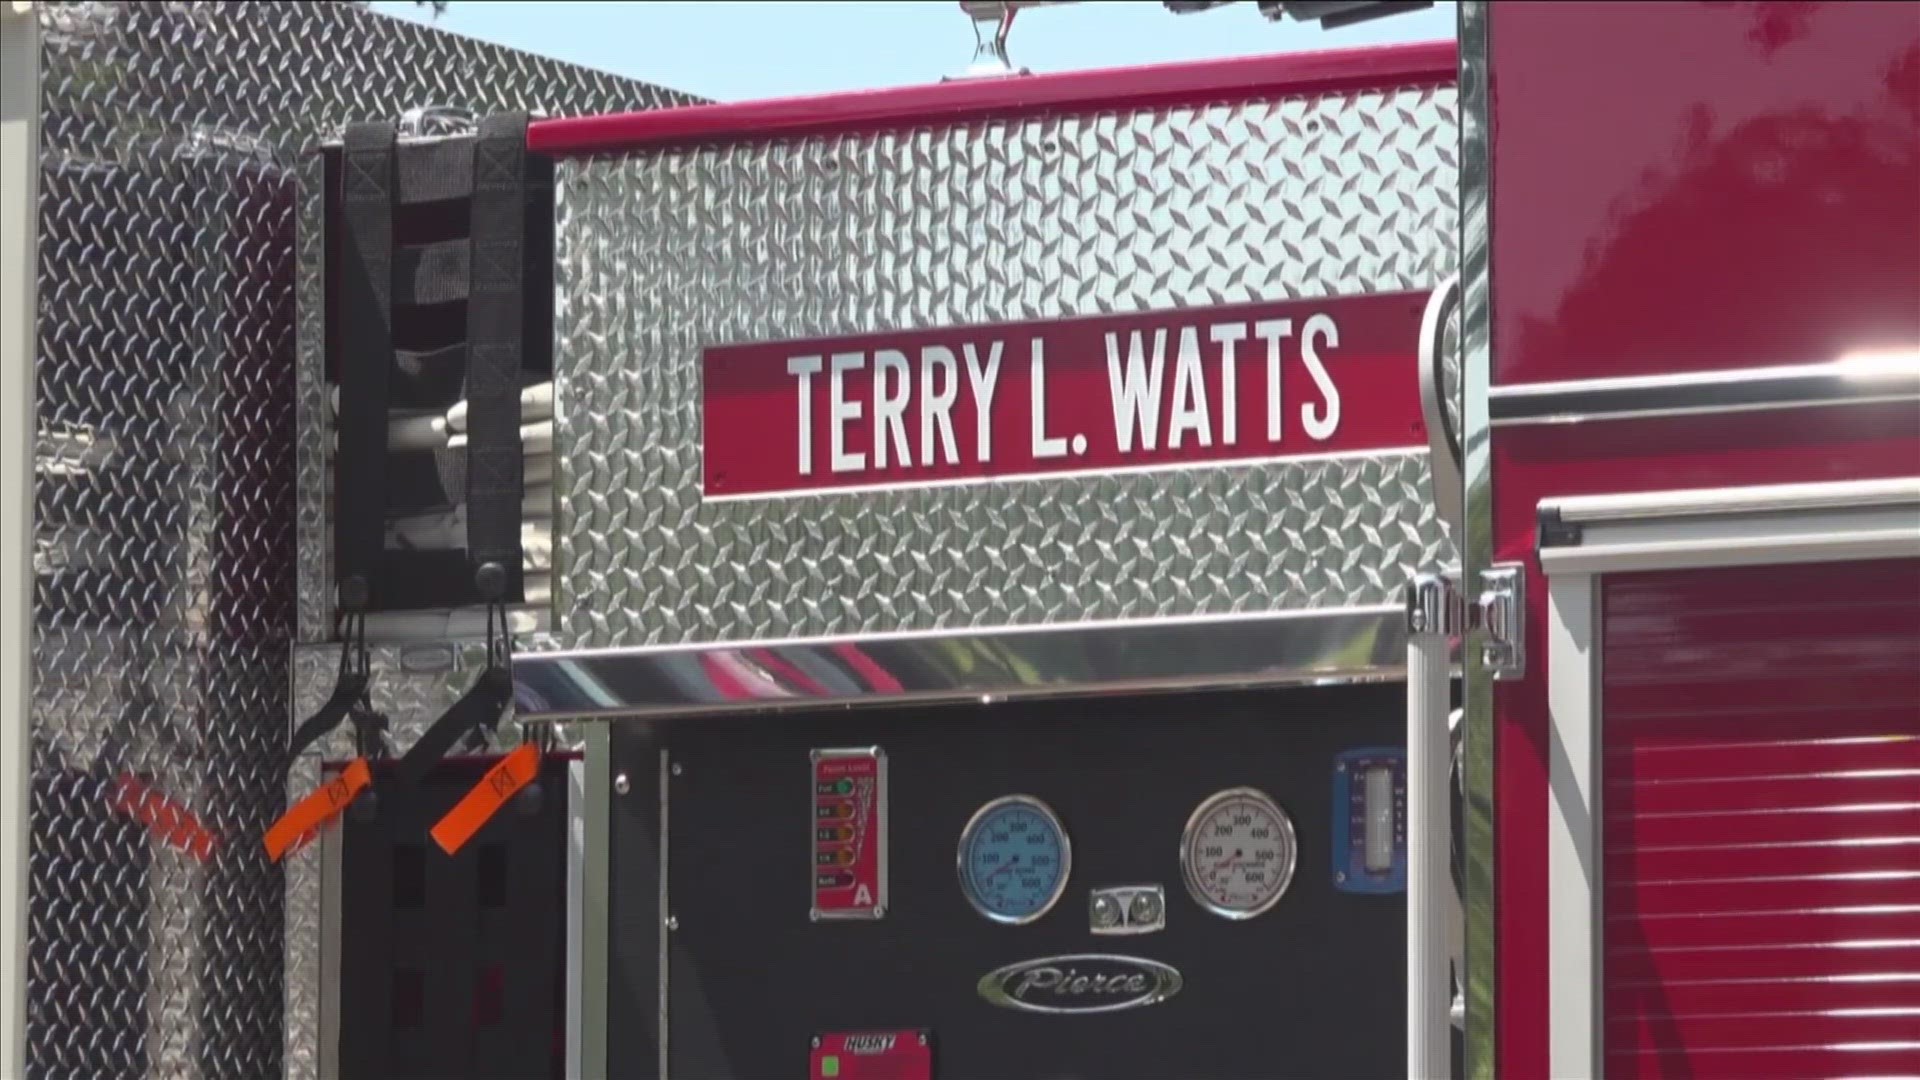 Wednesday, the Shelby County Fire Department held a dedication ceremony, with Lt. Terry Watts' name added to one of its fire engines.